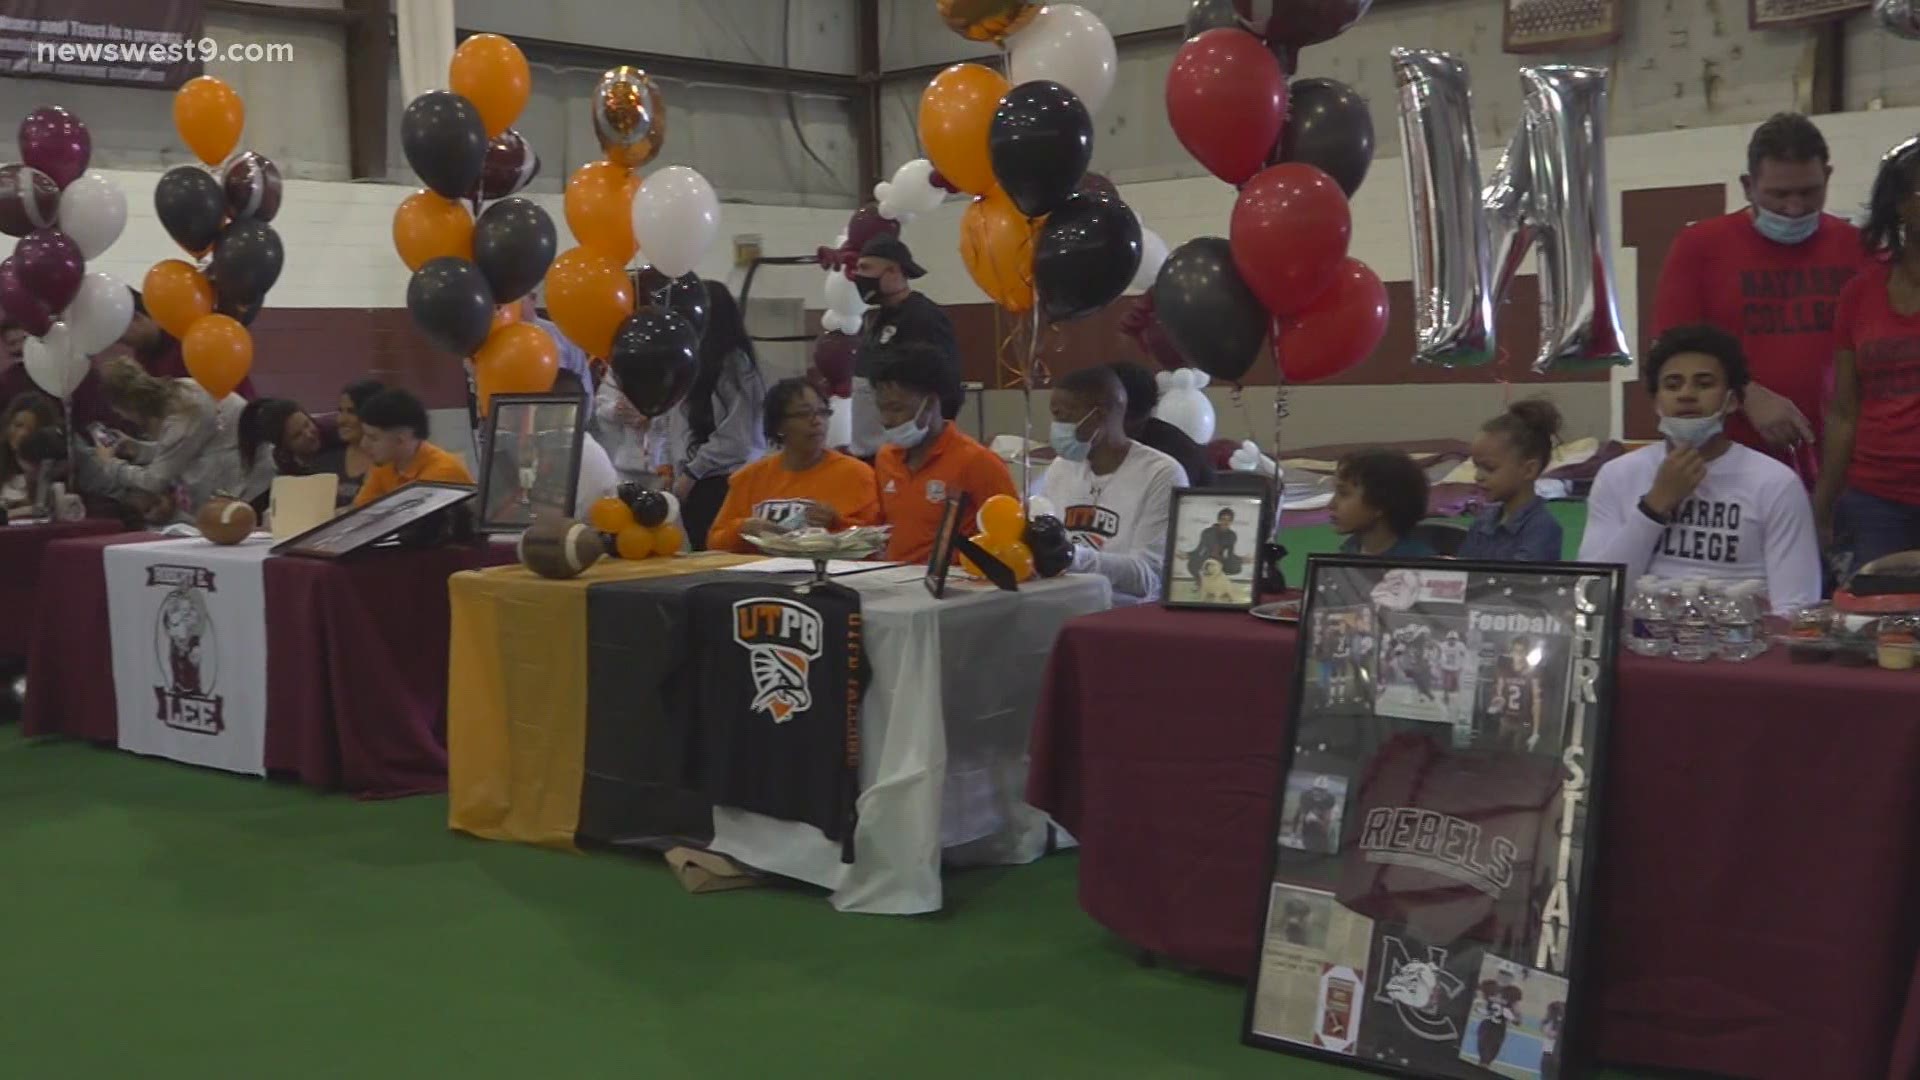 Lee sends 7 players to collegiate level